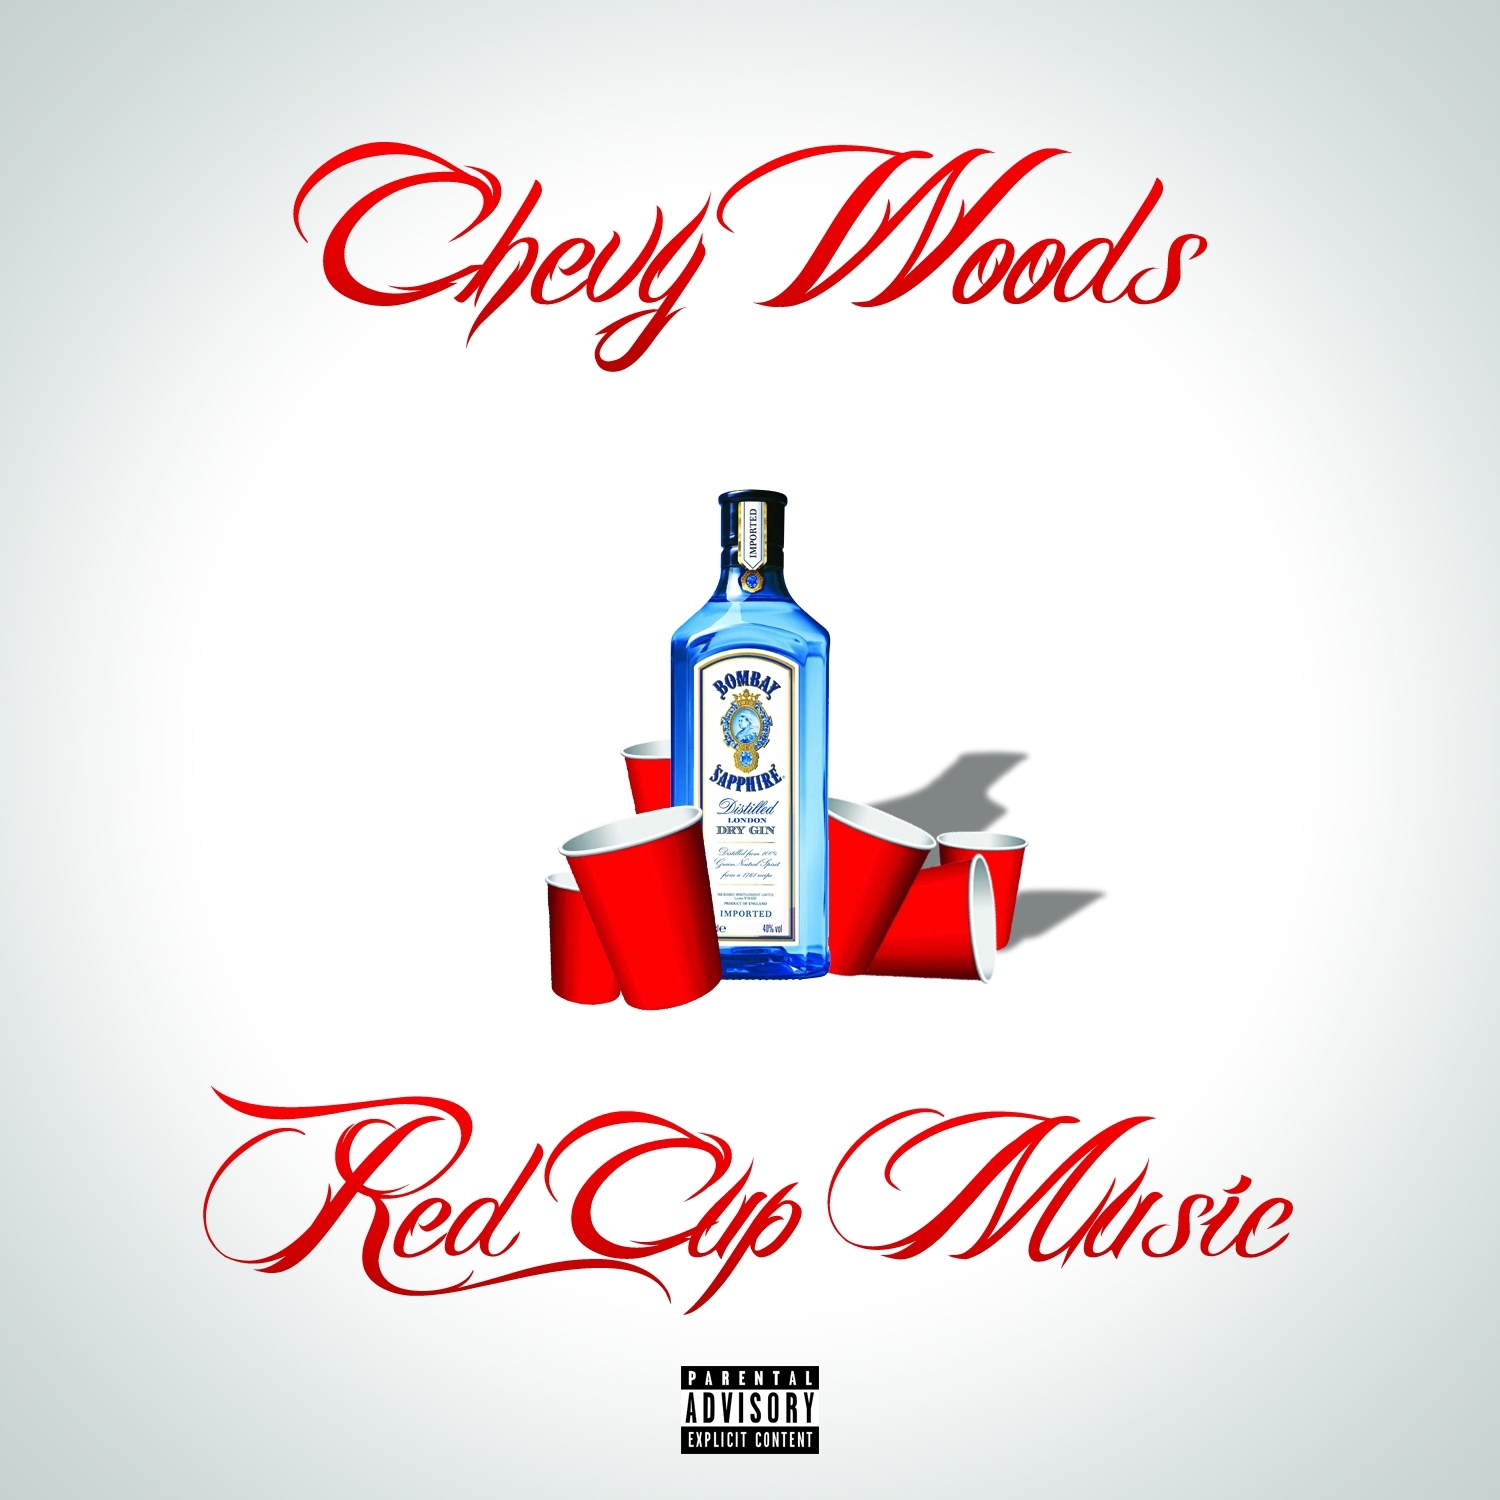 Red Cup Music